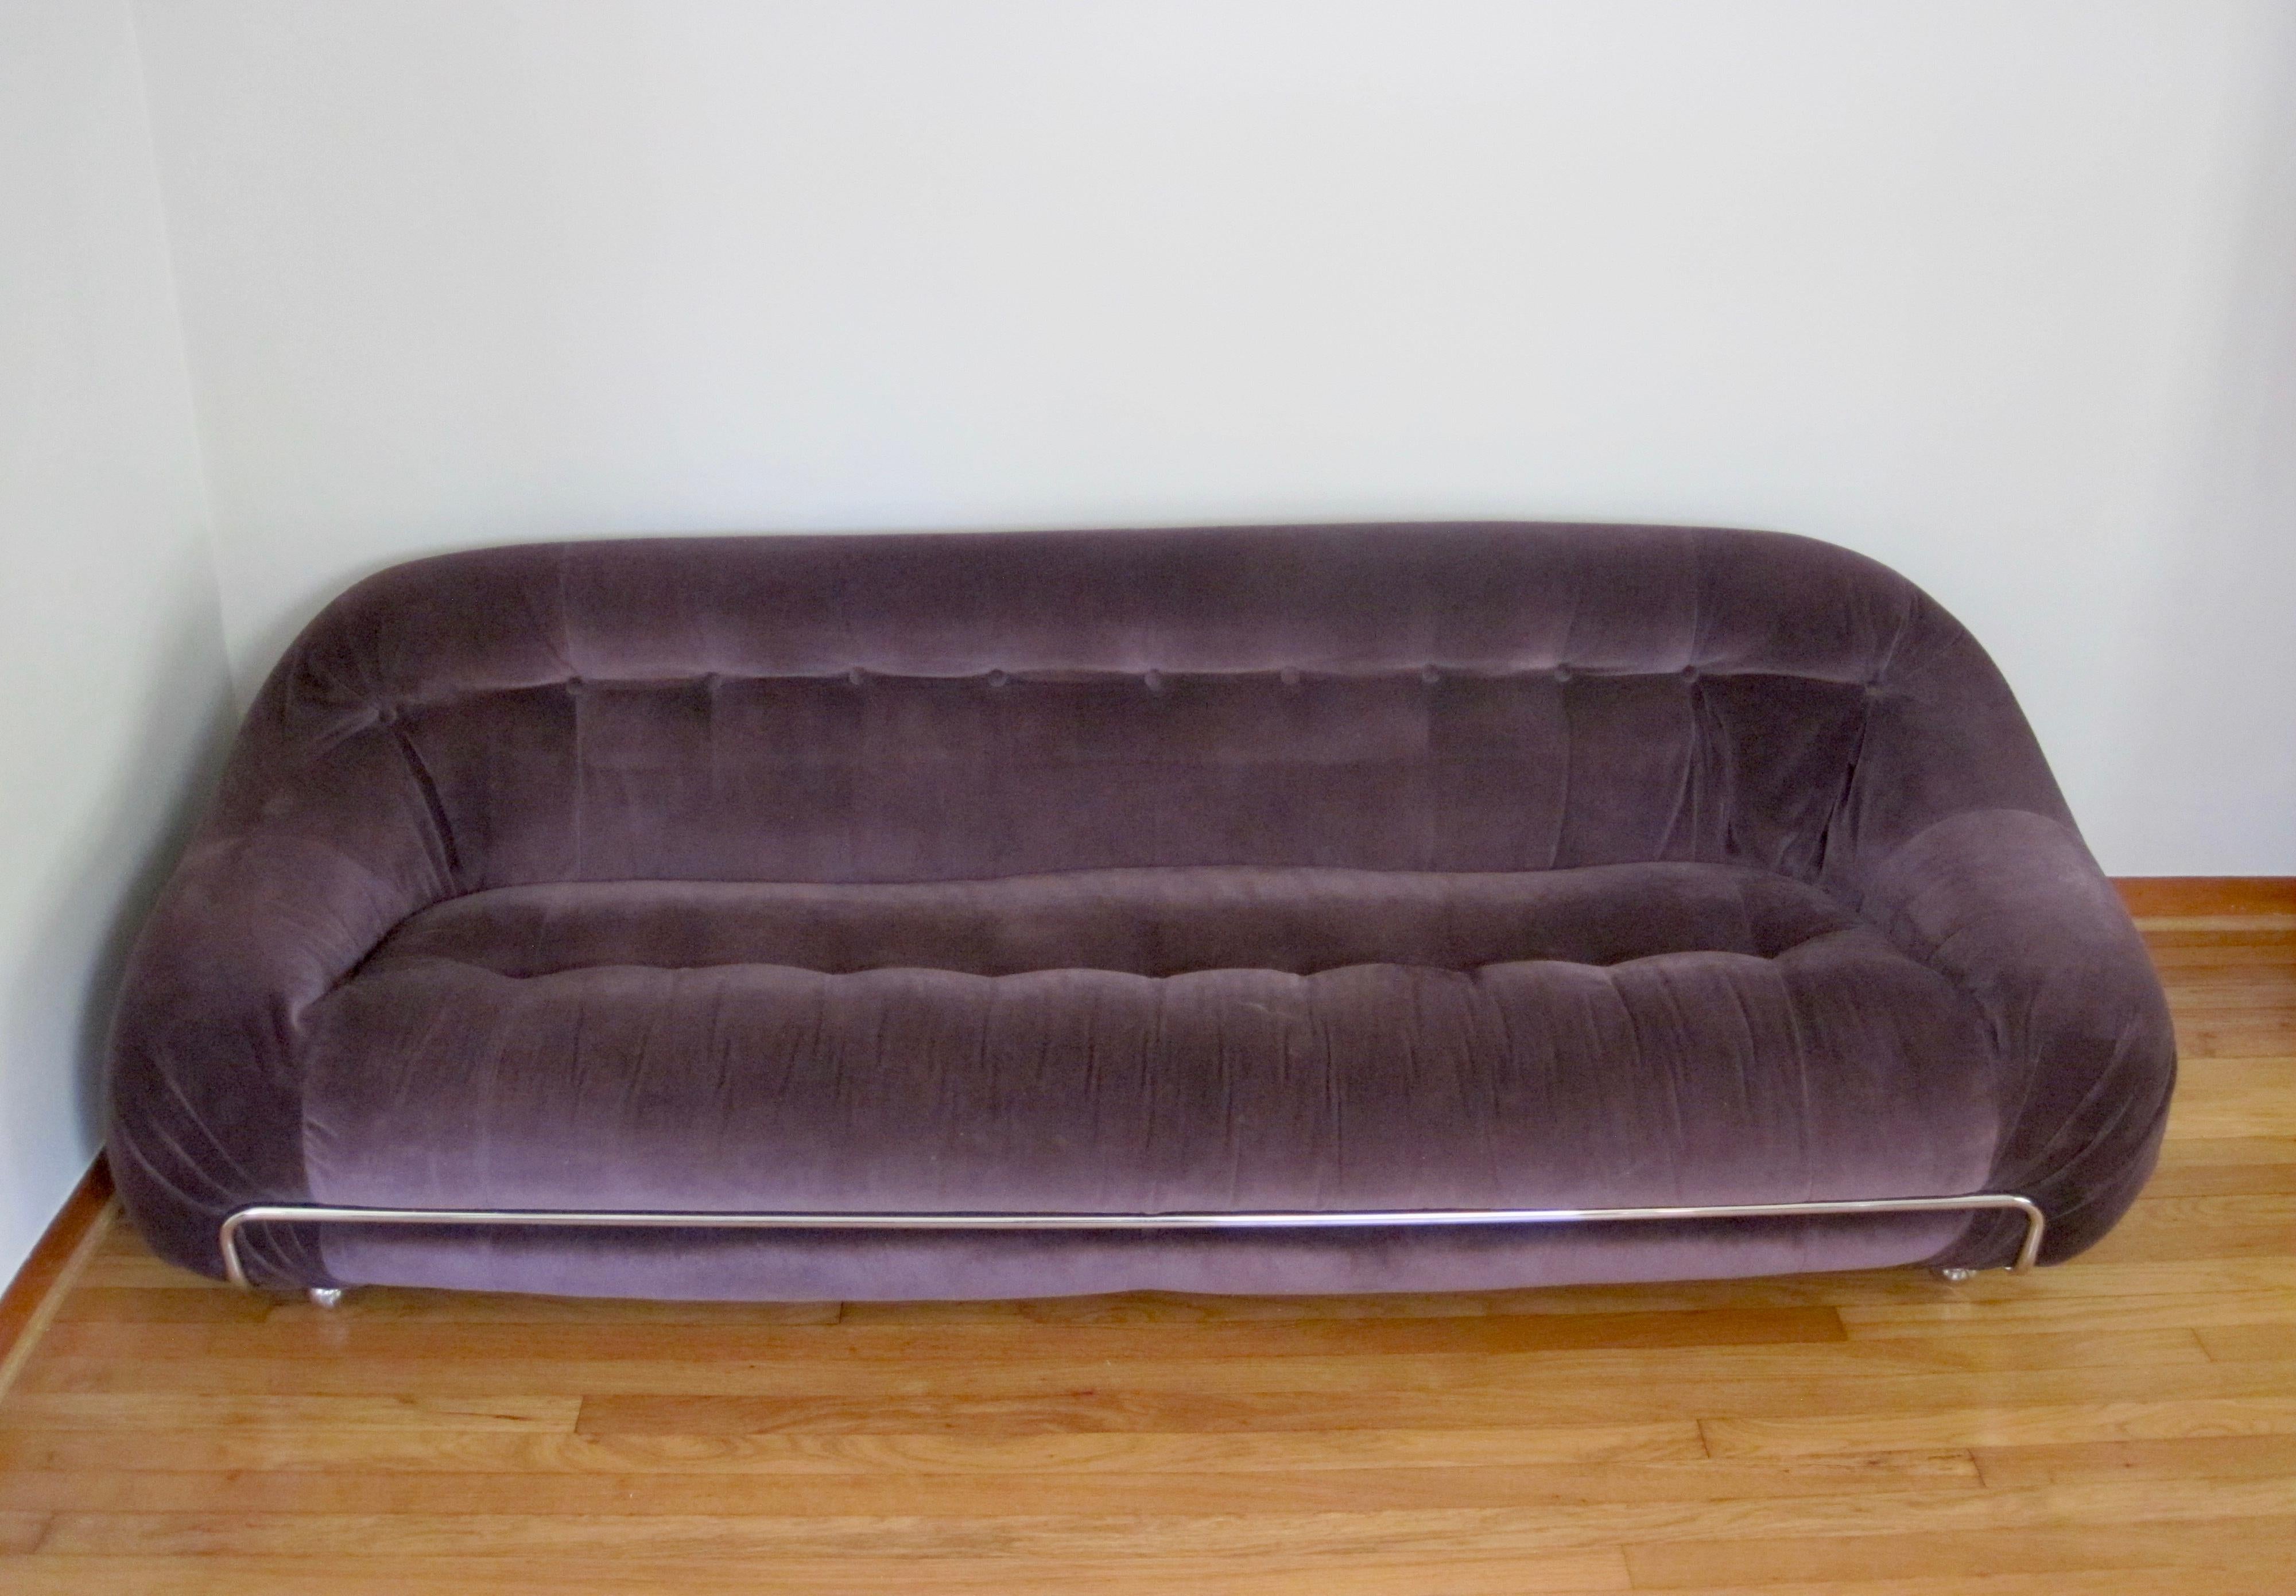 A purple velvet low profile sofa in the manner of Tobia Scarpa Soriana. 
This sofa sits low and is comfortable, cushioned yet firm.
Tufted on the seat and back, pleated at ends where back meets arms. A chrome bar across the front adds more detail.